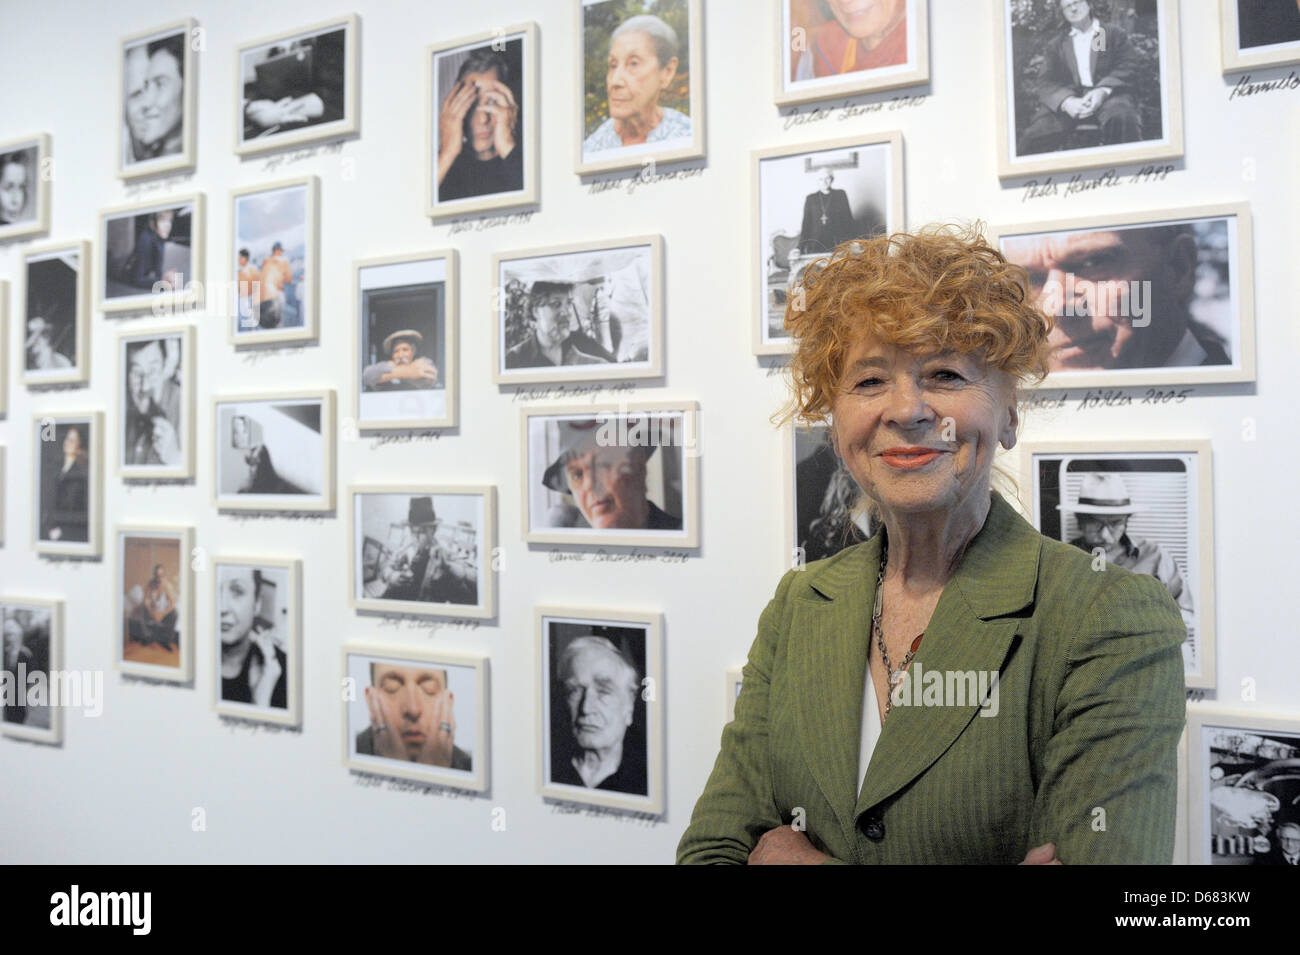 Photographer Herlinde Koelbl poses in front photographs at her exhibition titled 'Looking for Traces - Photographies of Herlinde Koelbl' at Haus der Geschichte in Bonn, Germany, 04 July 2012. 400 photographs by Koelbl are on display. Photo: FEDERICO GAMBARINI Stock Photo